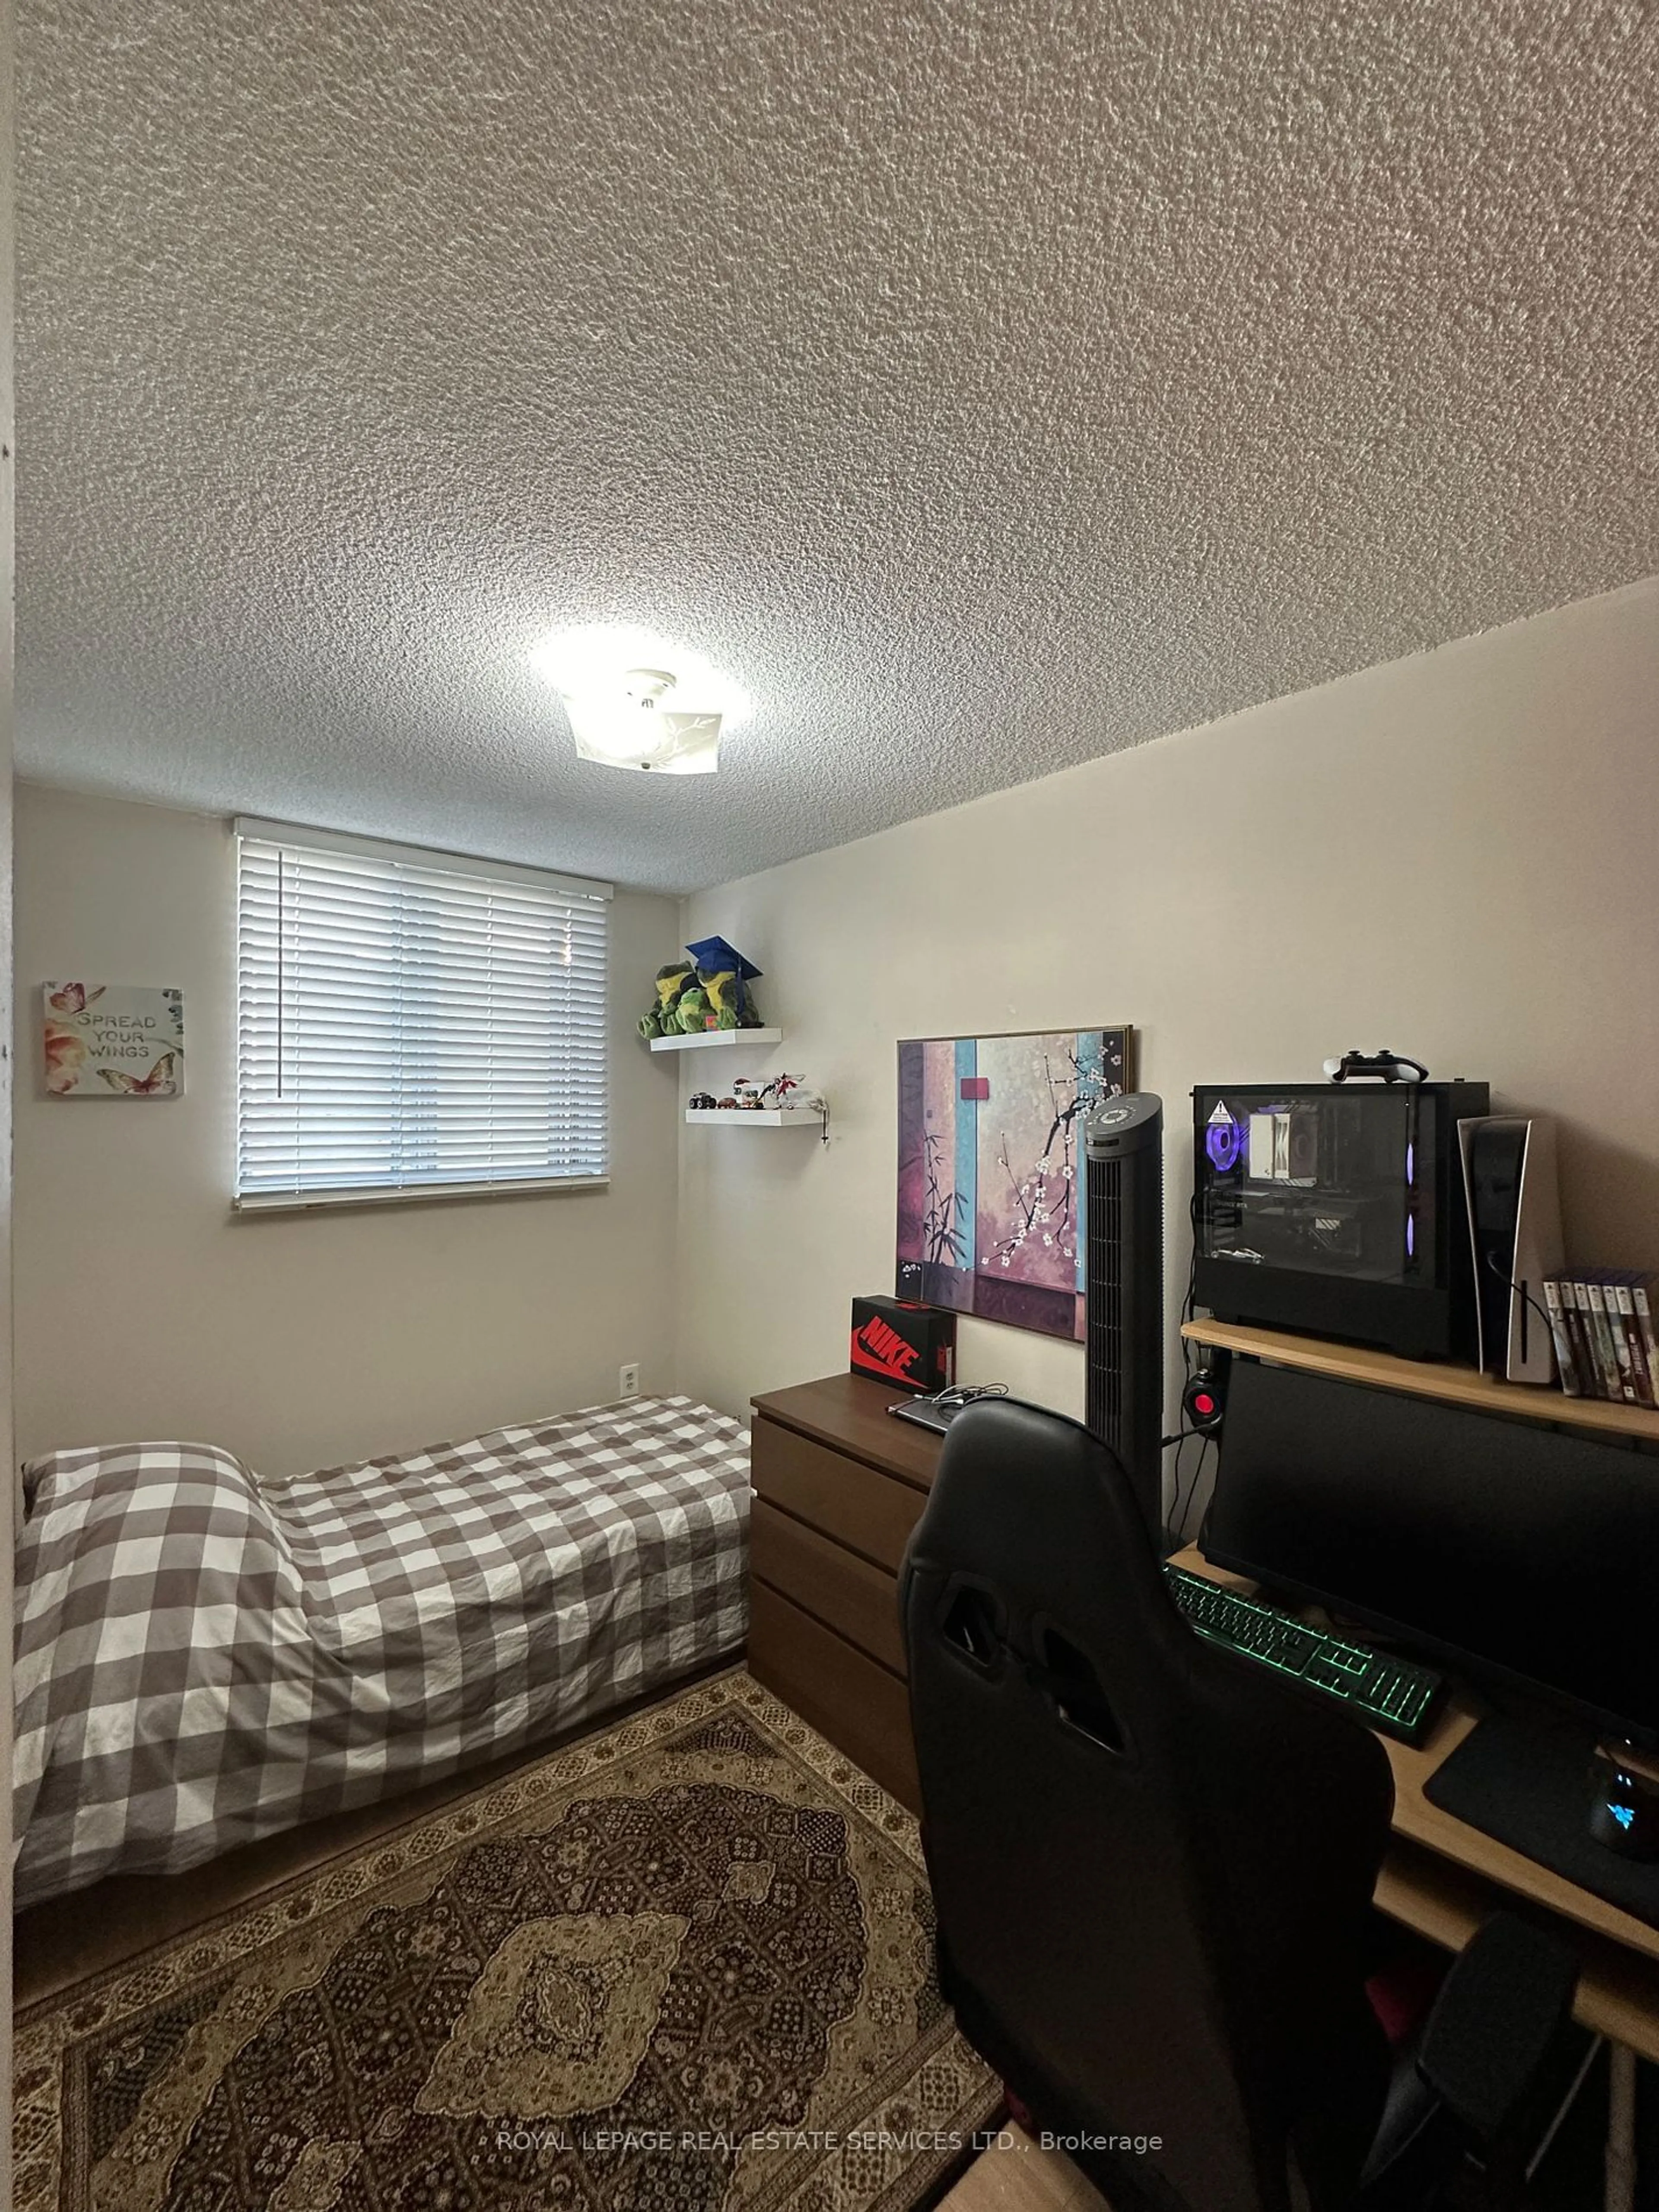 A pic of a room for 940 Caledonia Rd #608, Toronto Ontario M6B 3Y4